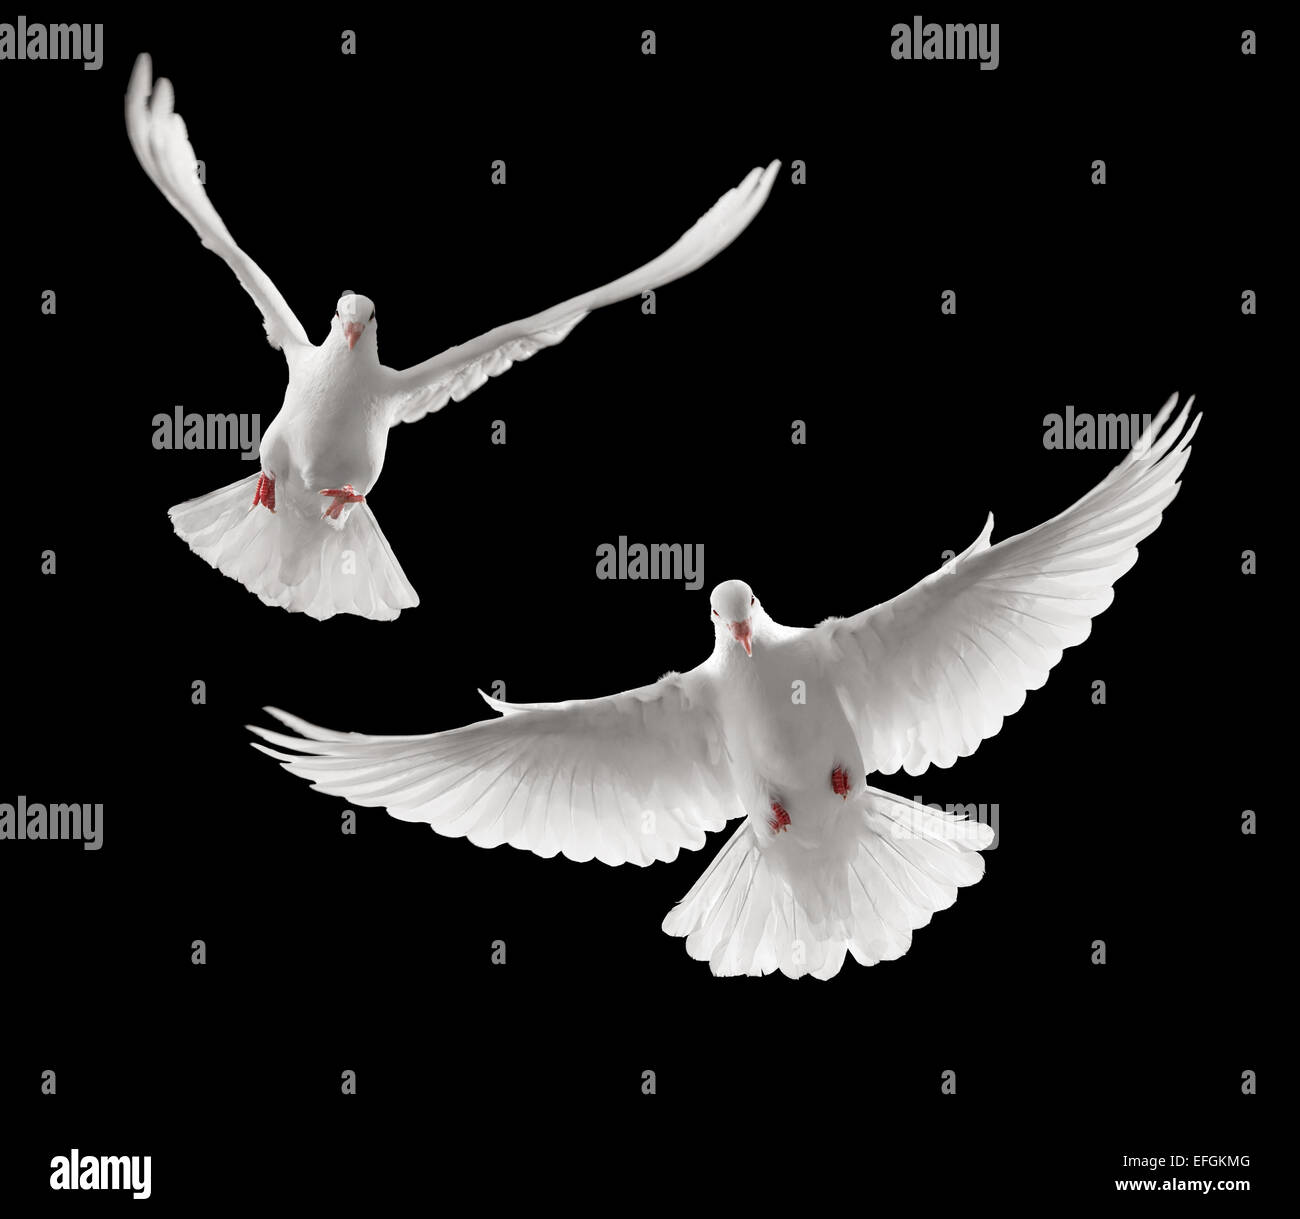 continuous shots of dove flying towards you Stock Photo